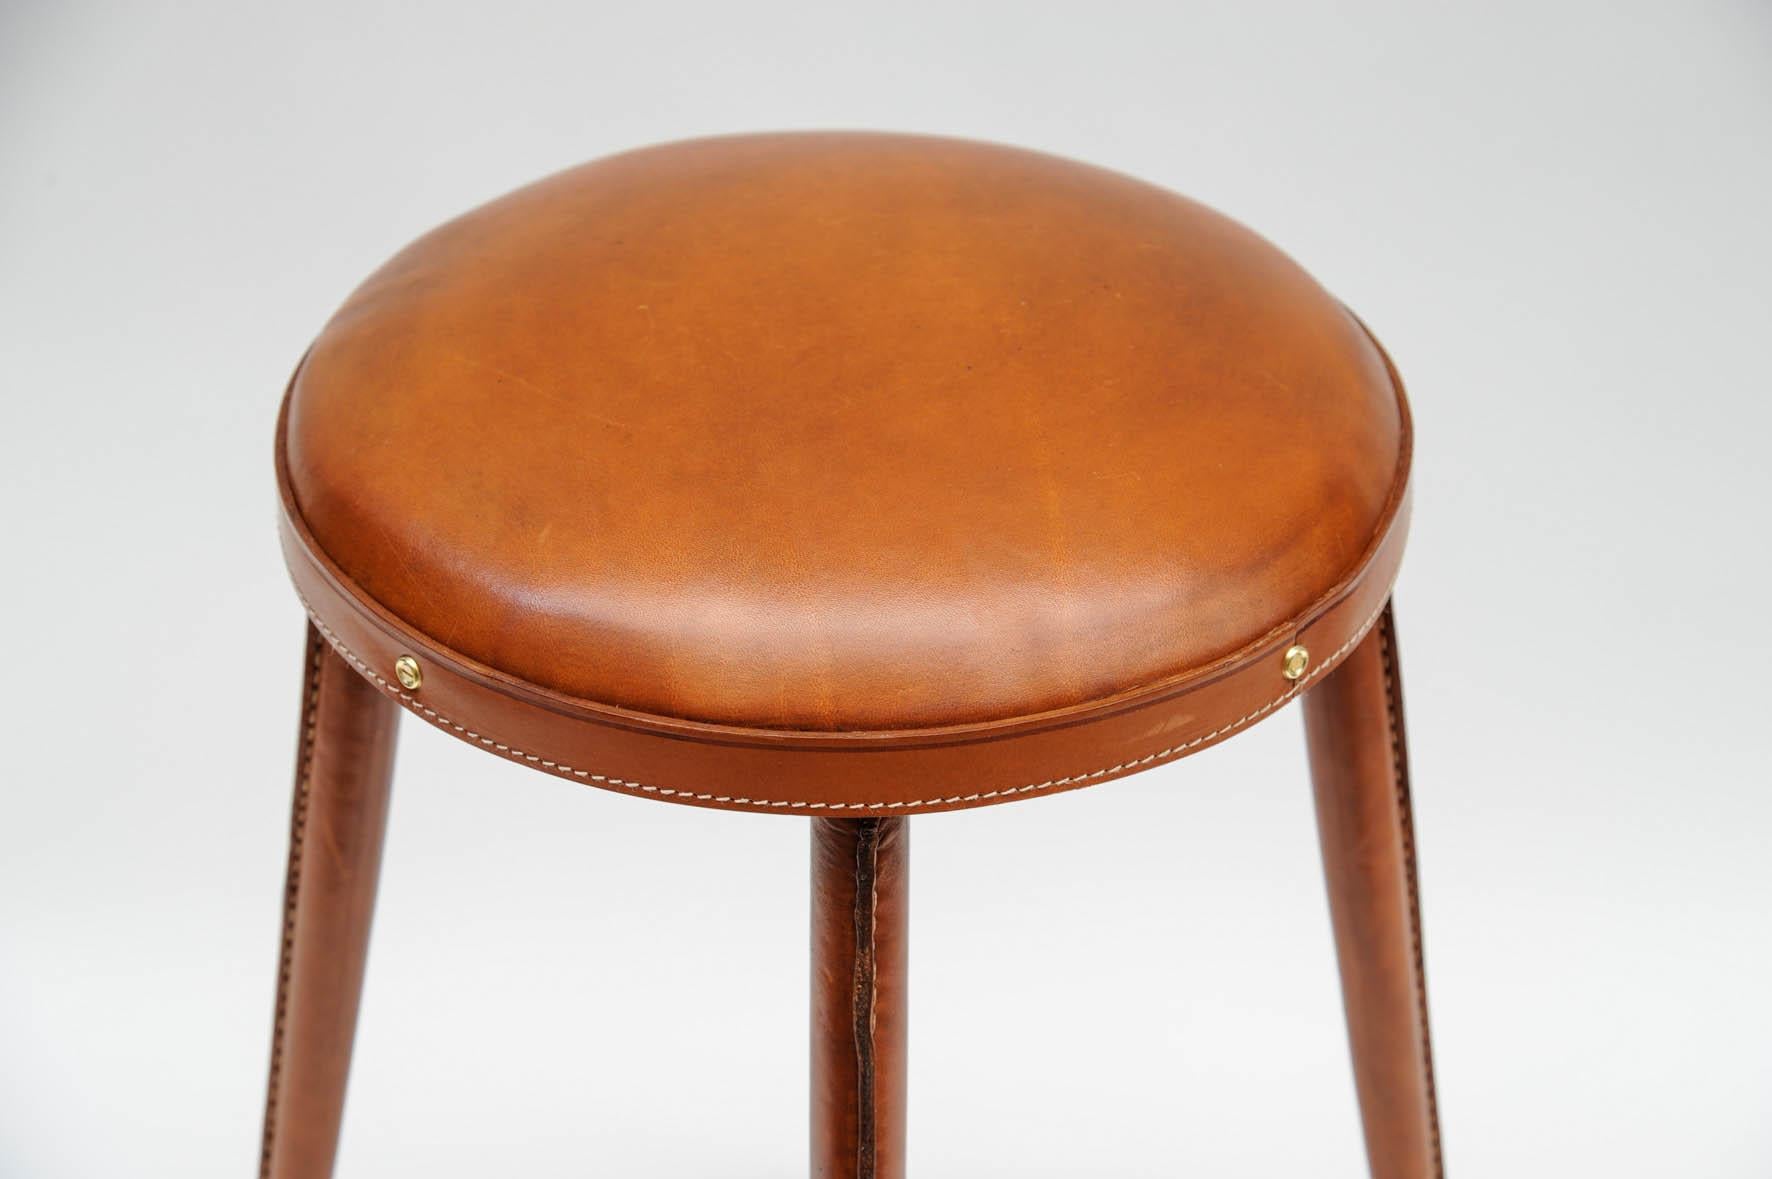 French Pair of Stitched Leather Stools by Jacques Adnet